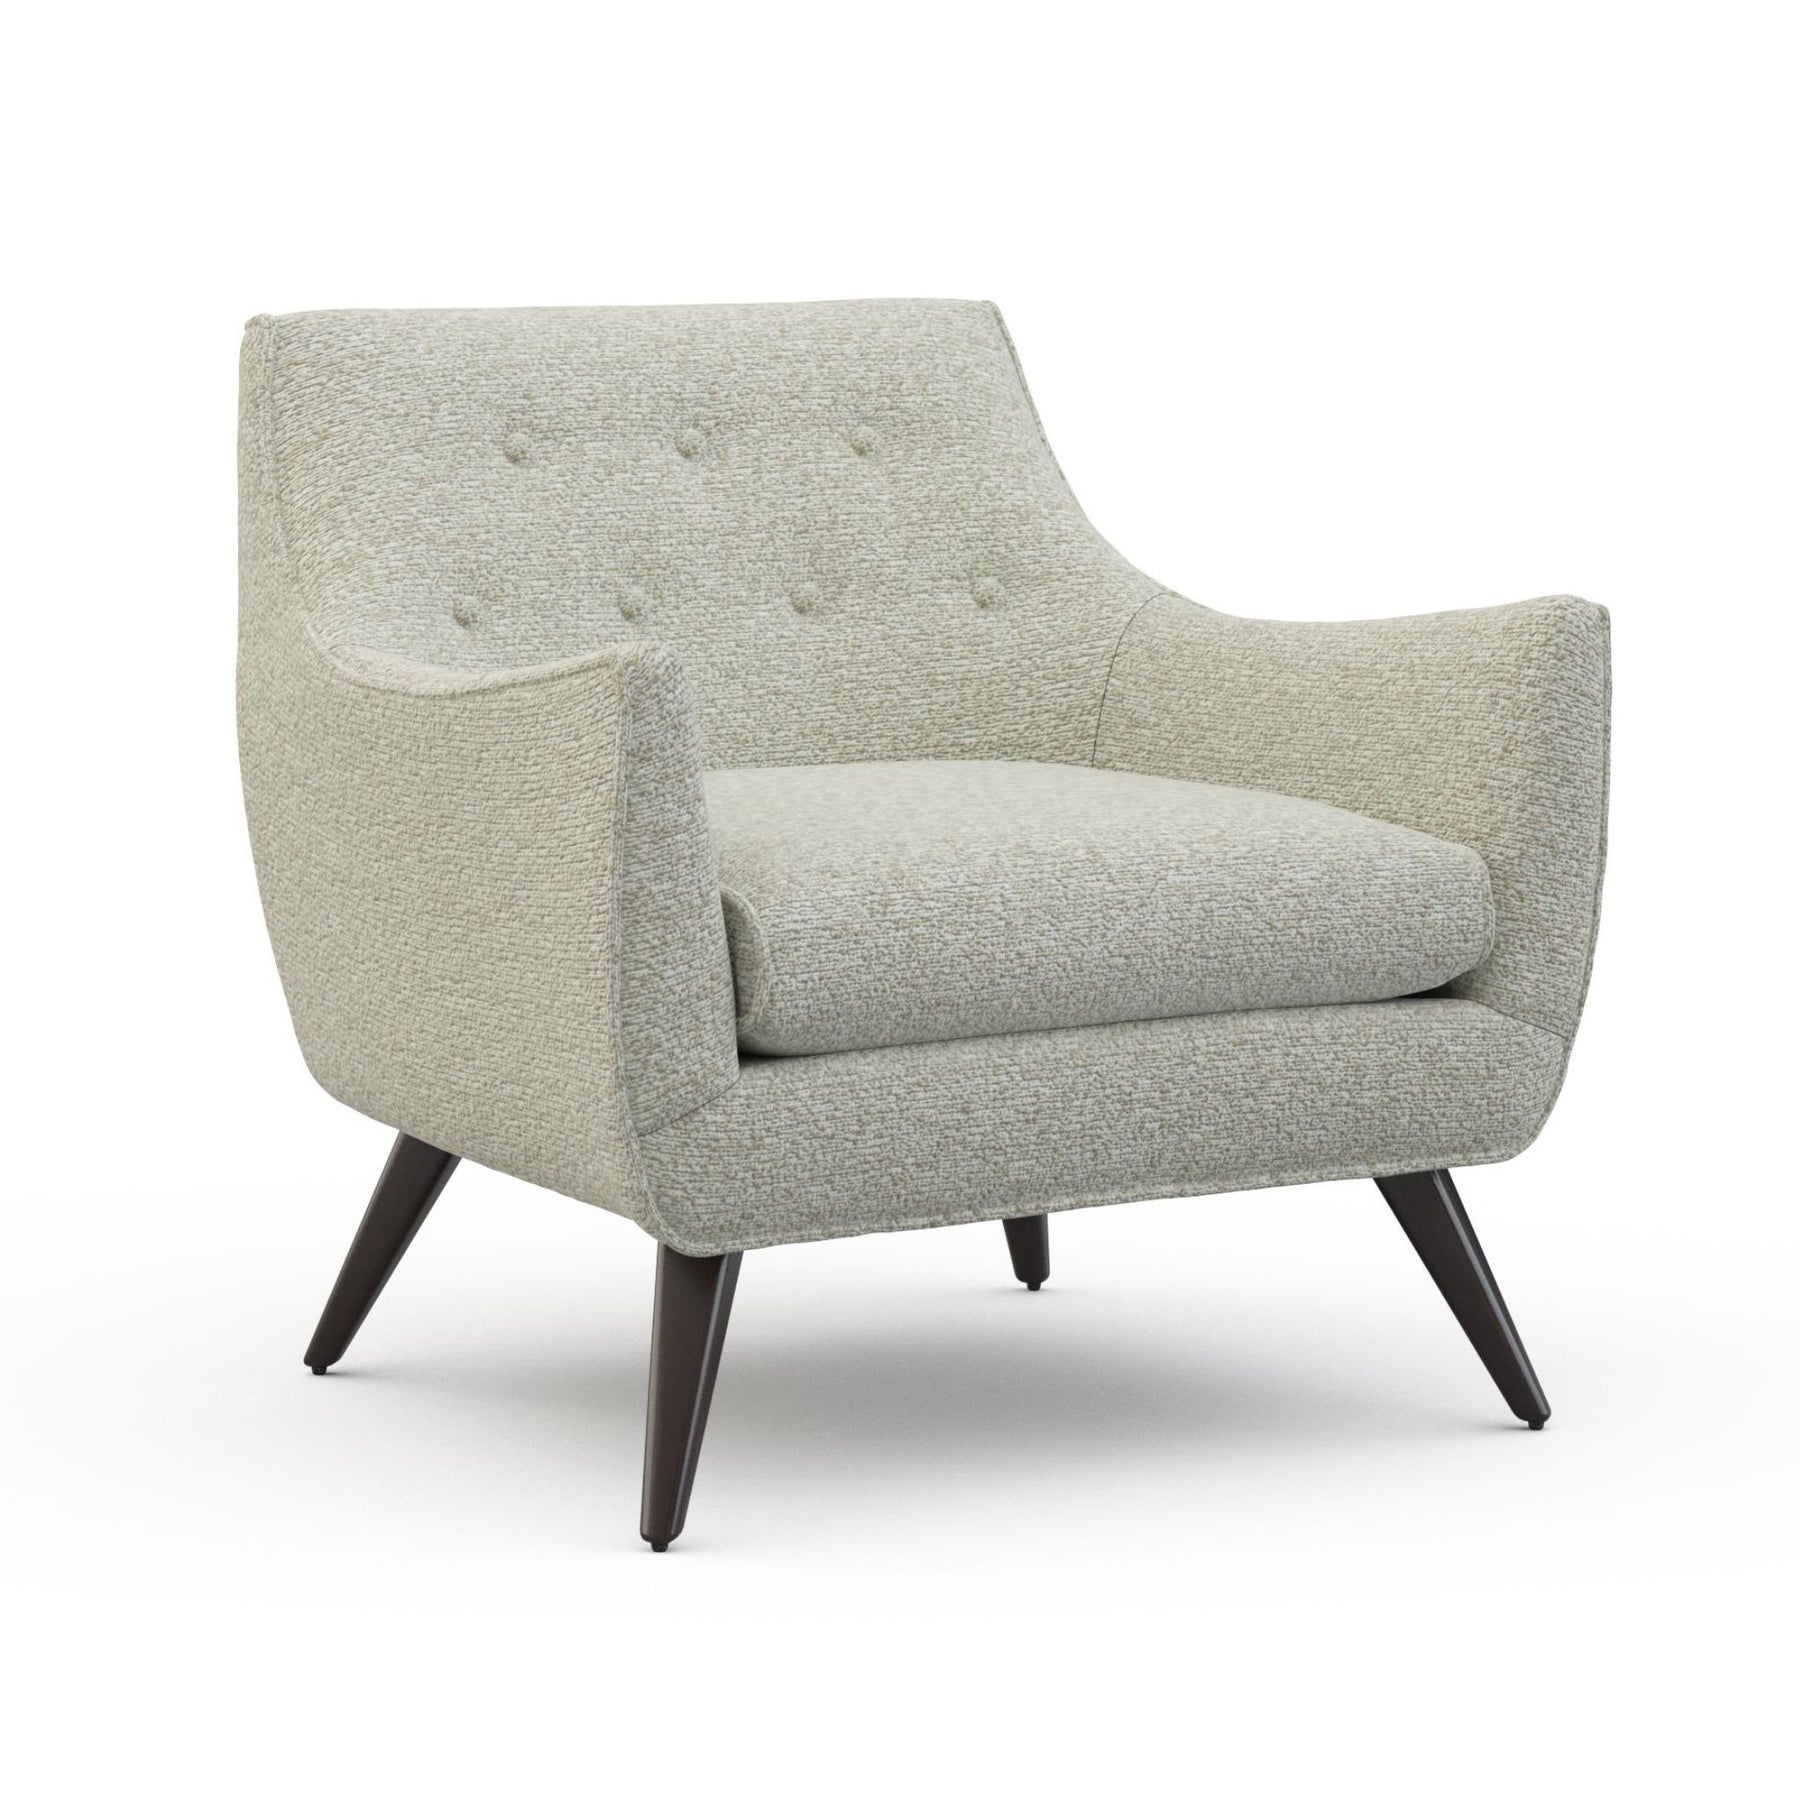 Precedent Marley Chair 4168-C1 in Cleo Angora